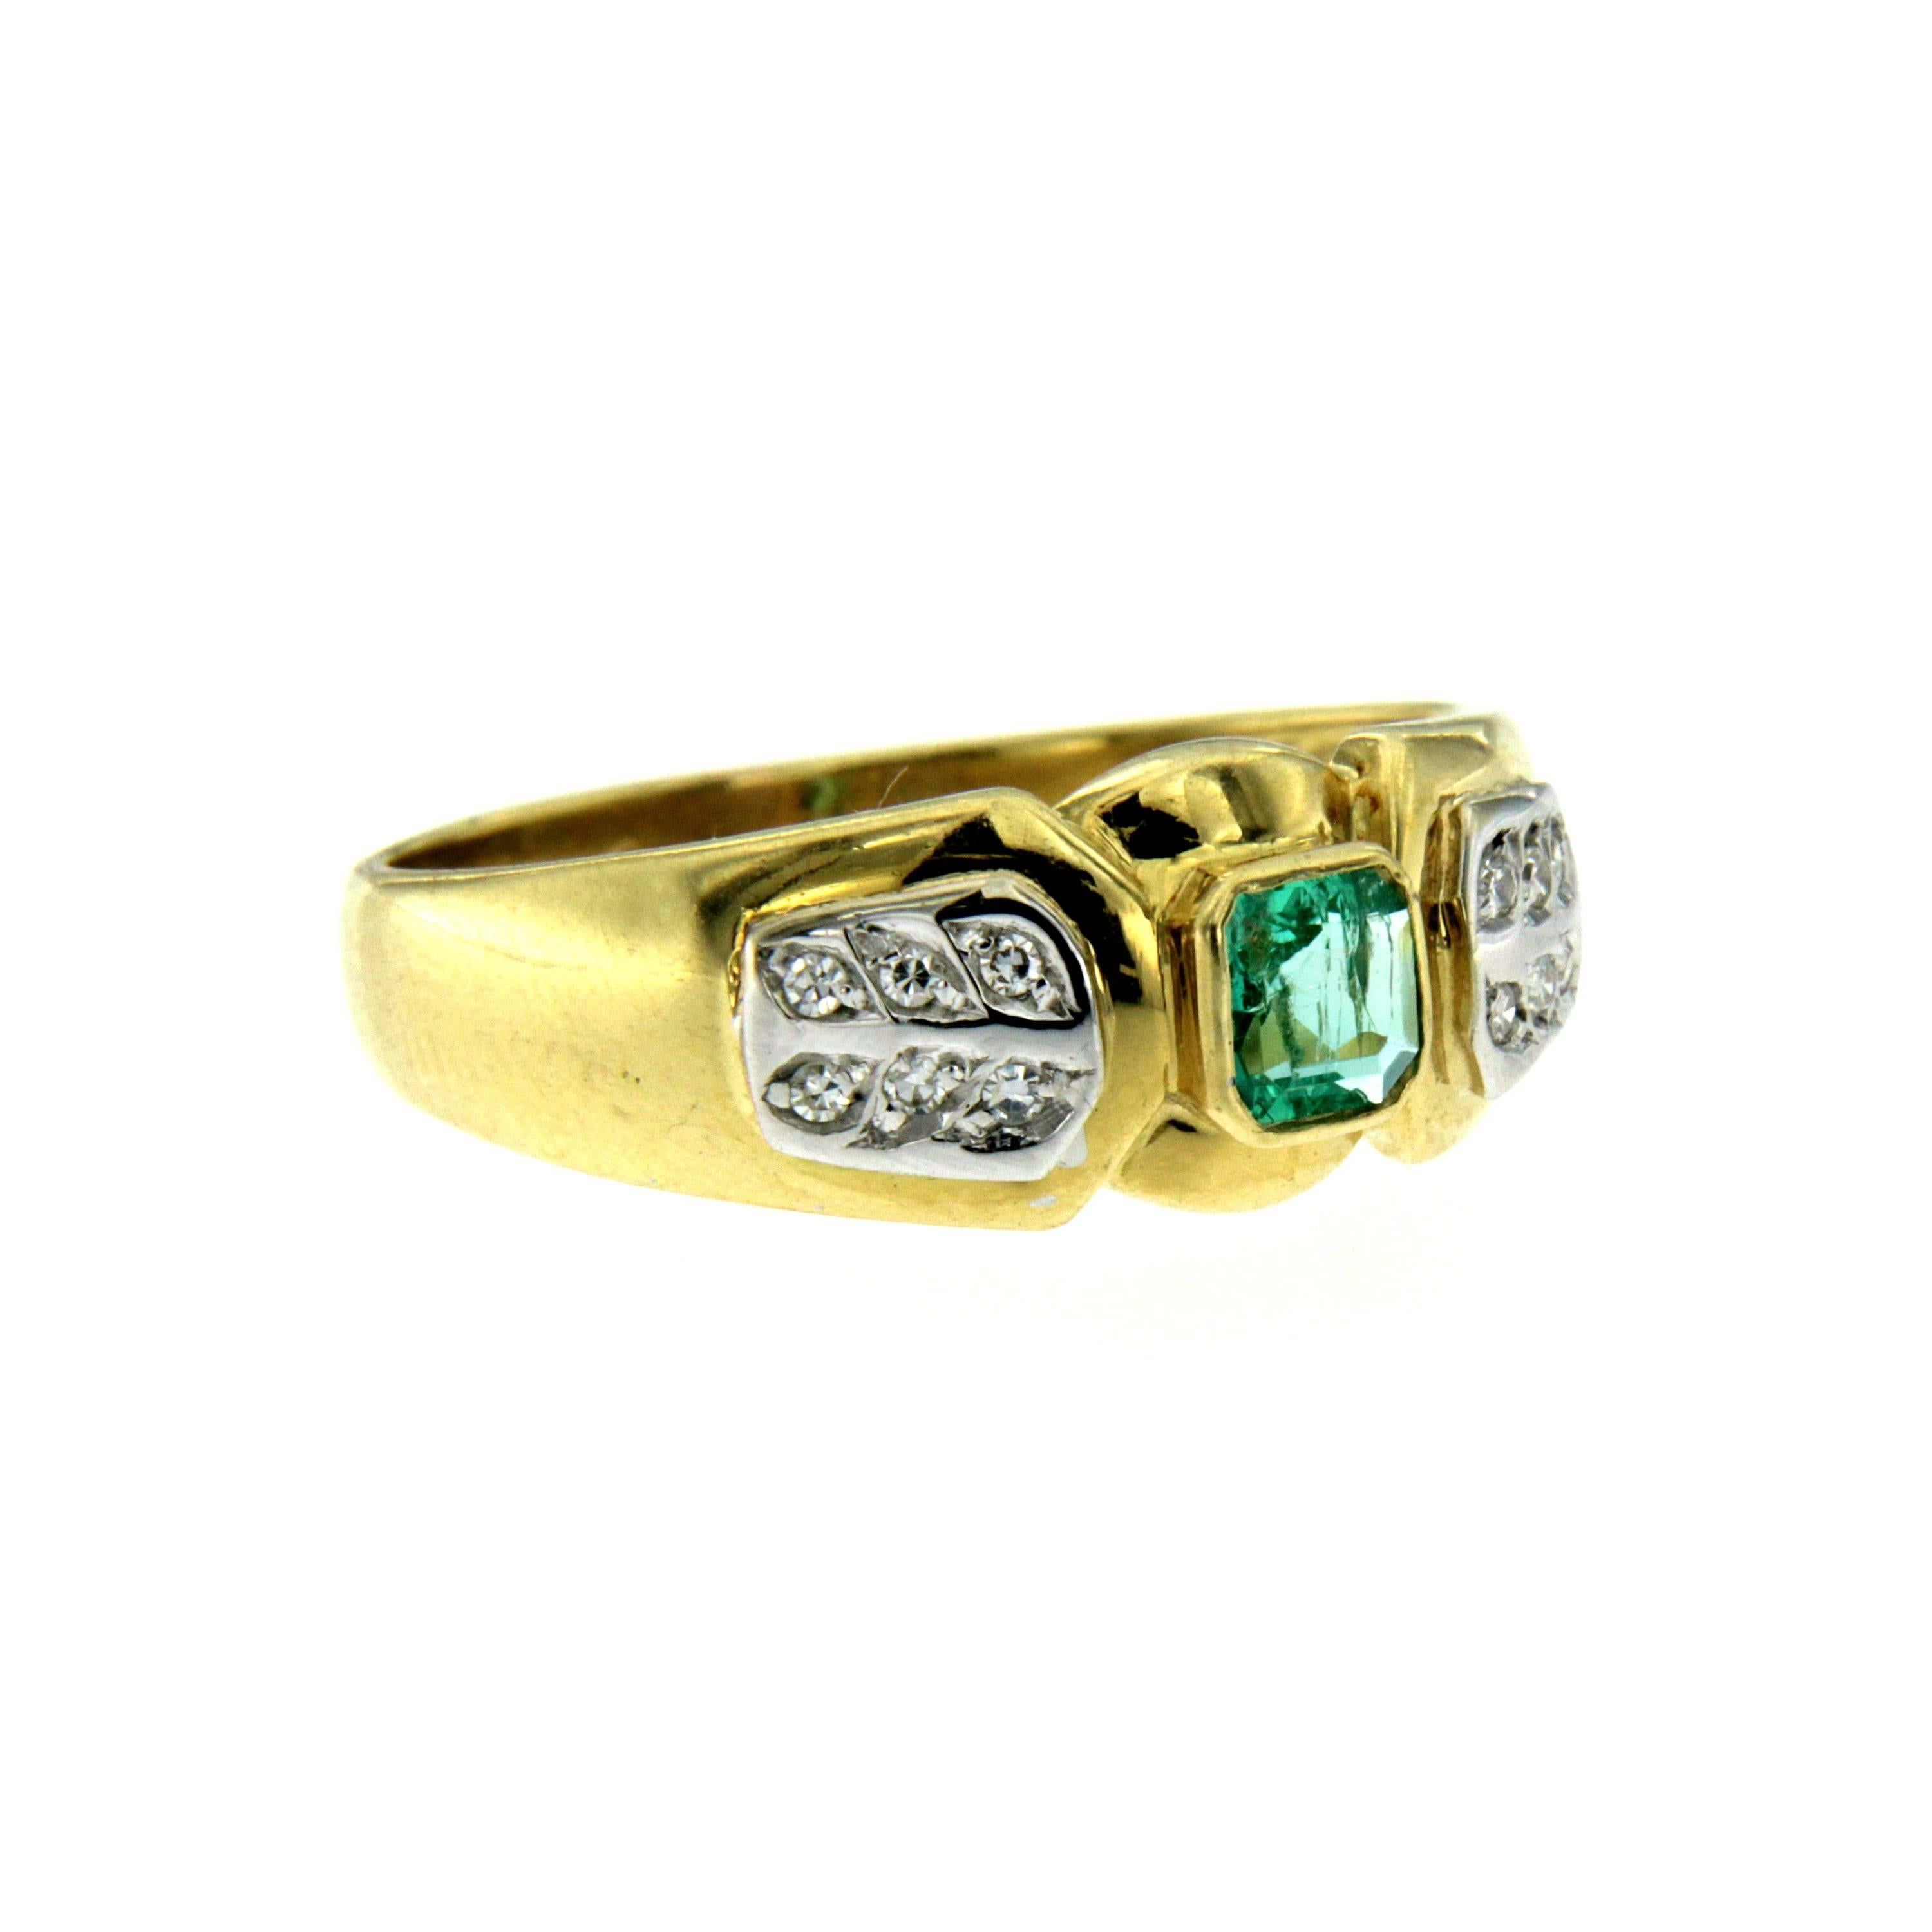 Gorgeous Retro ring handcrafted in 18k yellow gold set with a center emerald weighing 0.40 carats accented by 16 small round brilliant cut diamonds 0.12 total carats G-H color. Circa 1950

CONDITION: Pre-owned - Excellent
METAL: 18k Gold
GEM STONE: